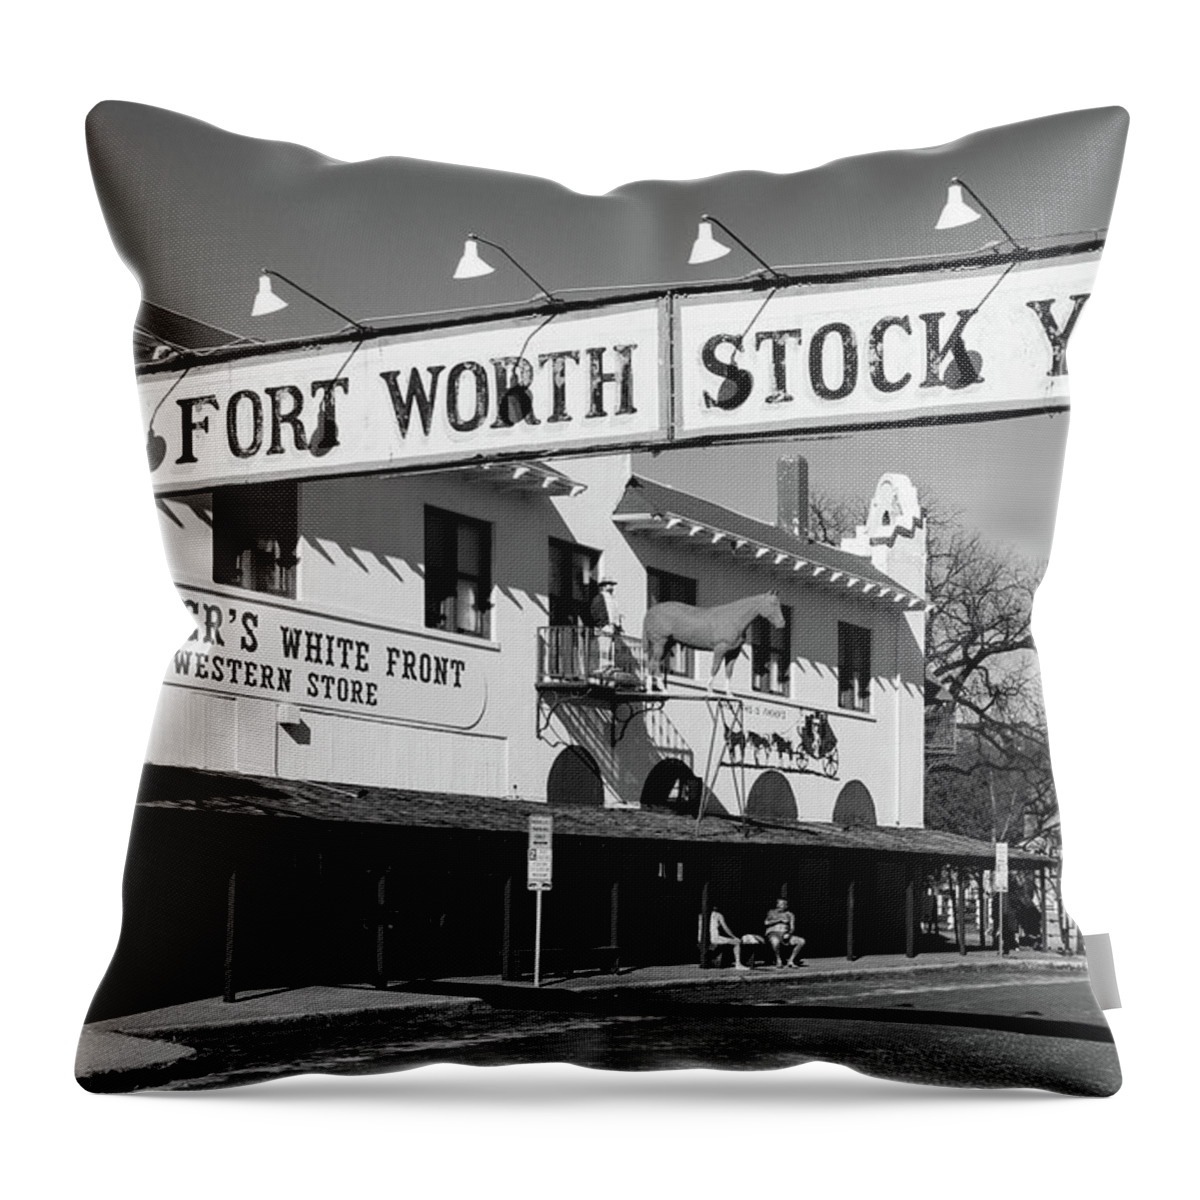 Texas Throw Pillow featuring the photograph Fort Worth Stockyards by KC Hulsman